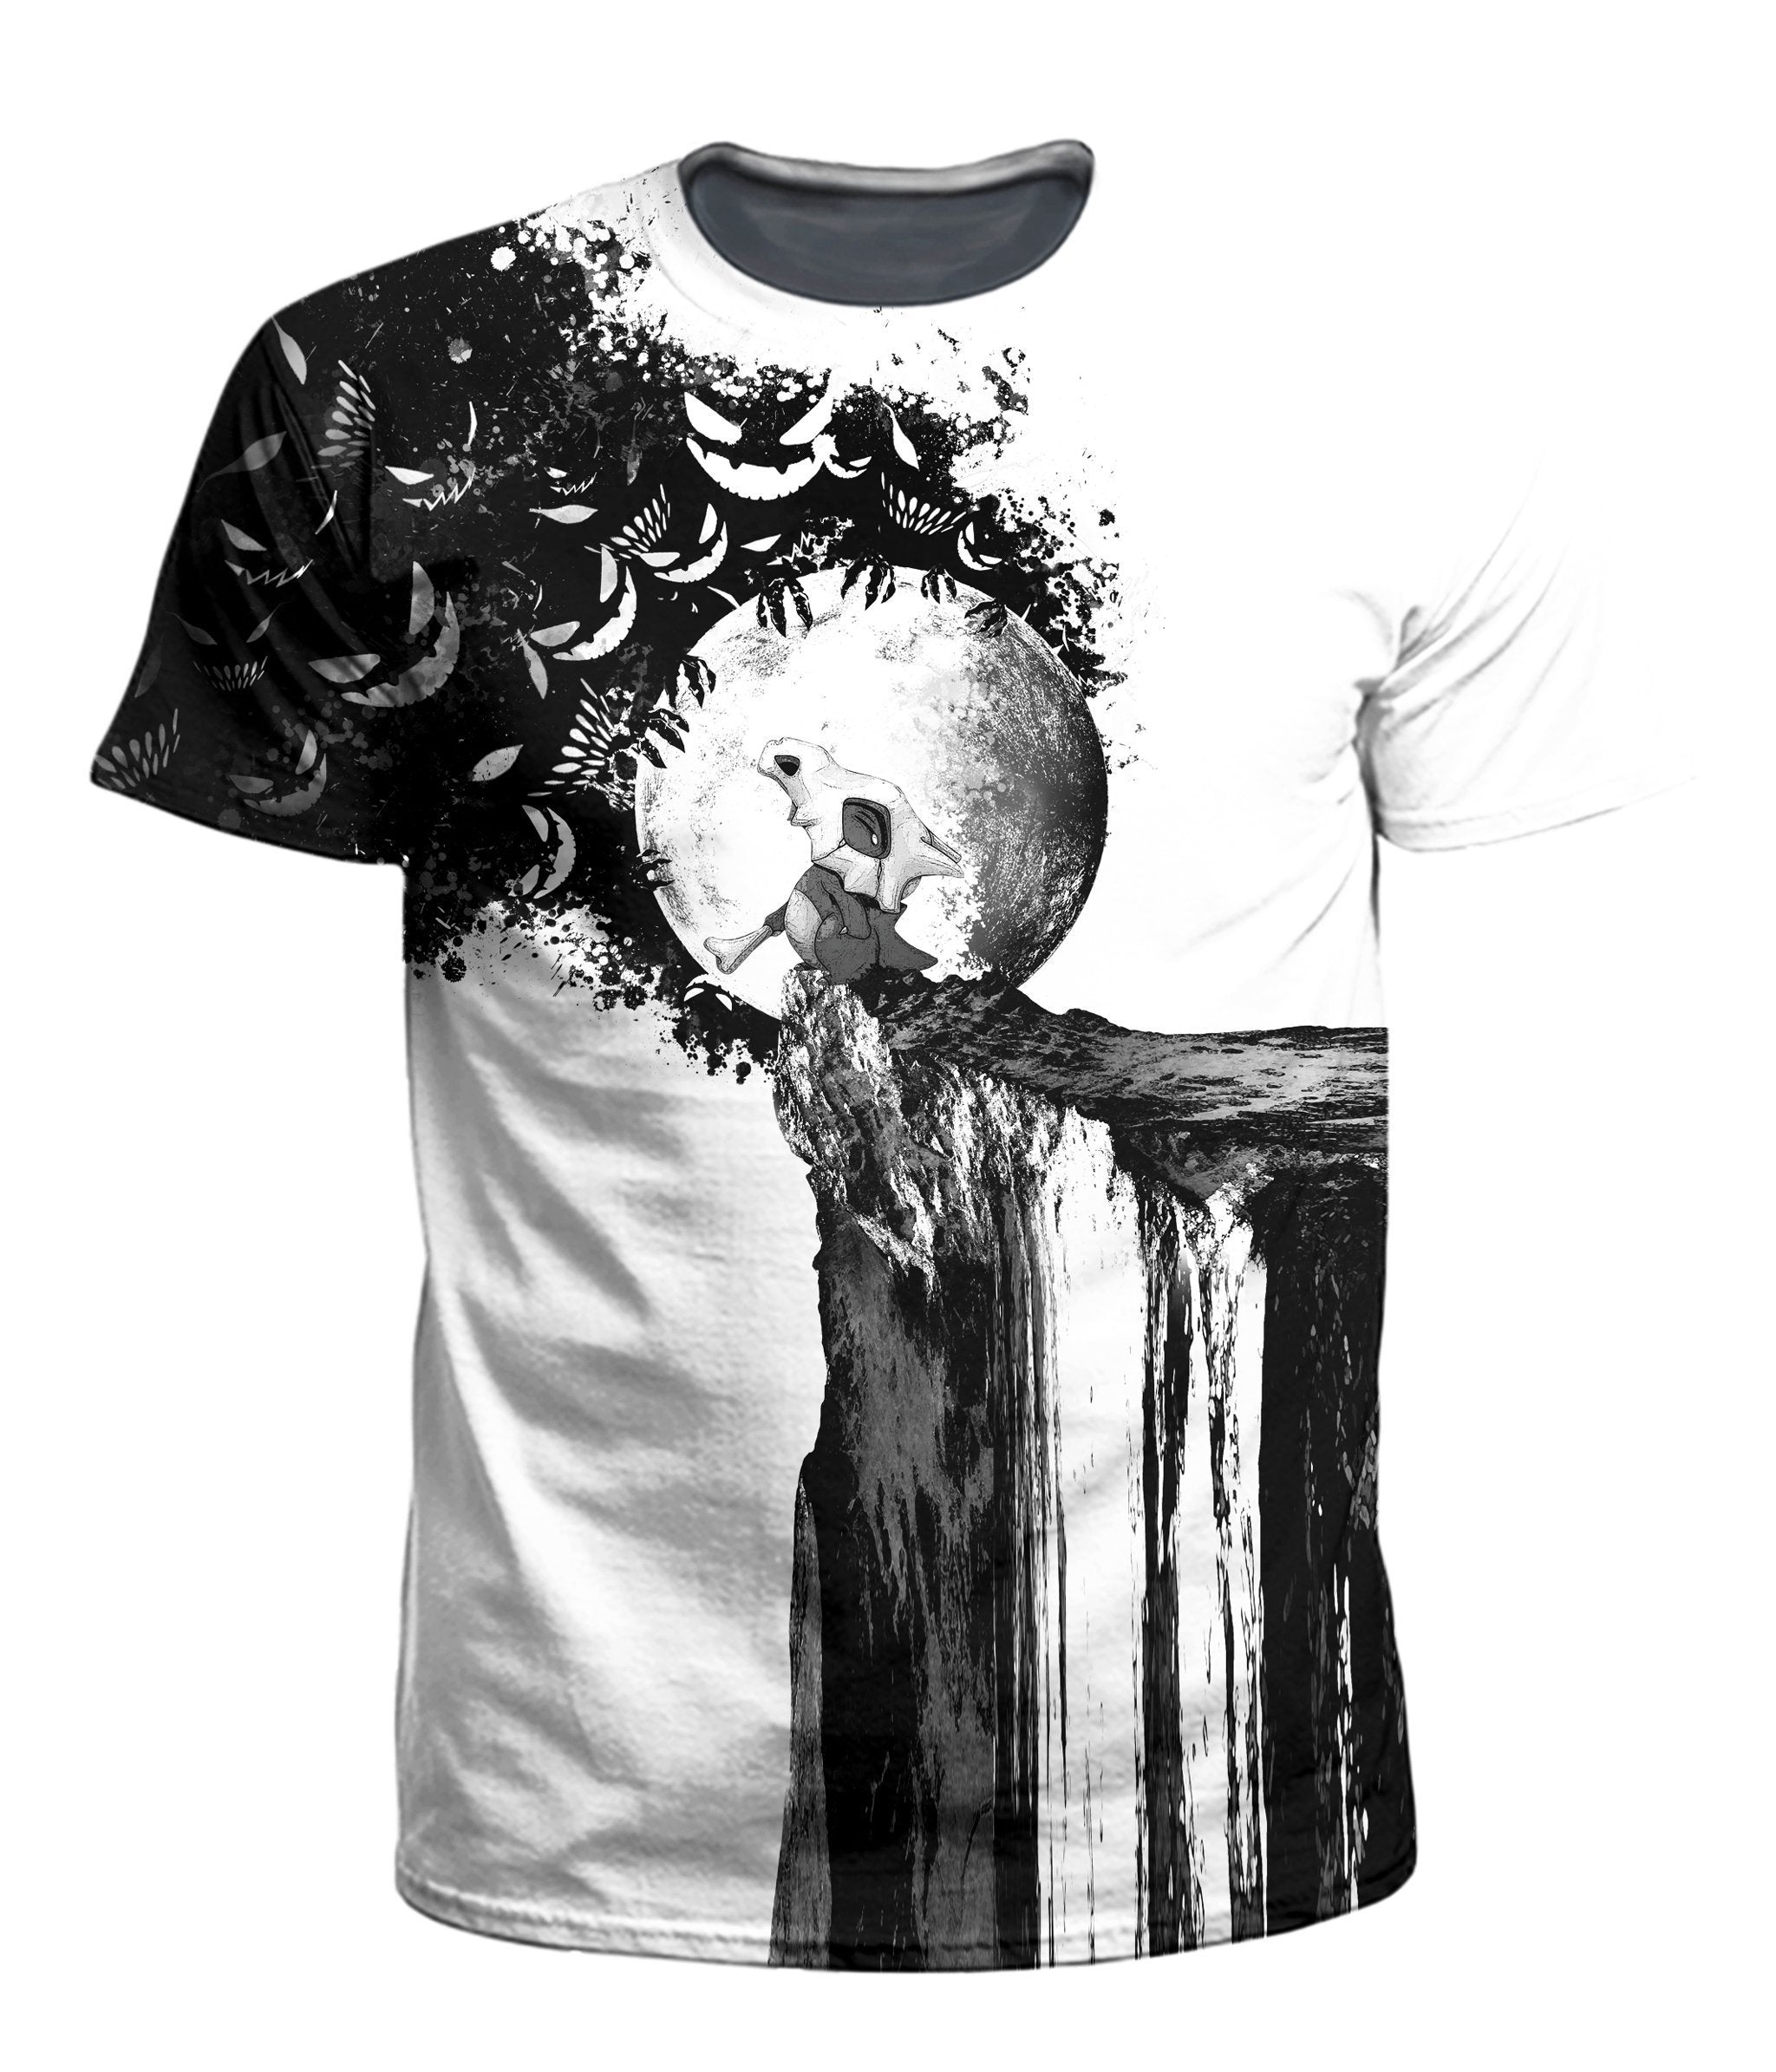 wicked t shirt designs